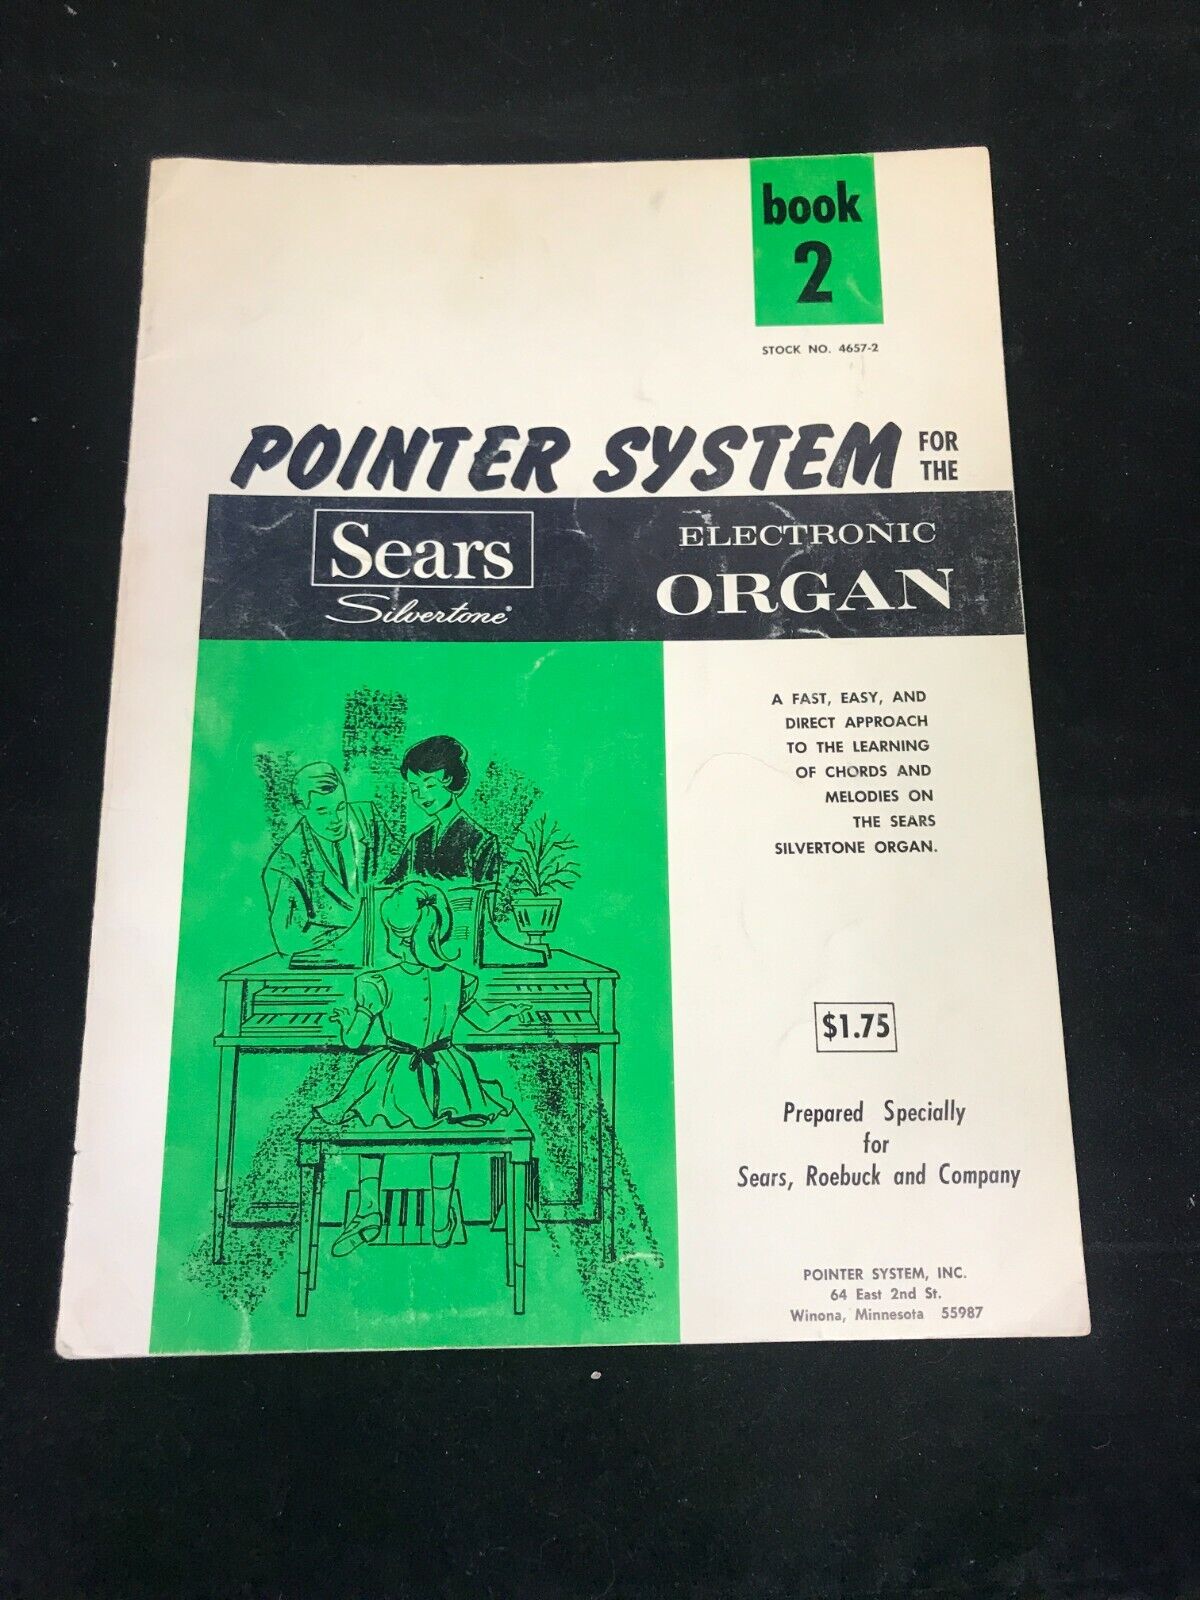 Vintage Music Book - The Pointer System for Sears Silvertone Organs Book 2